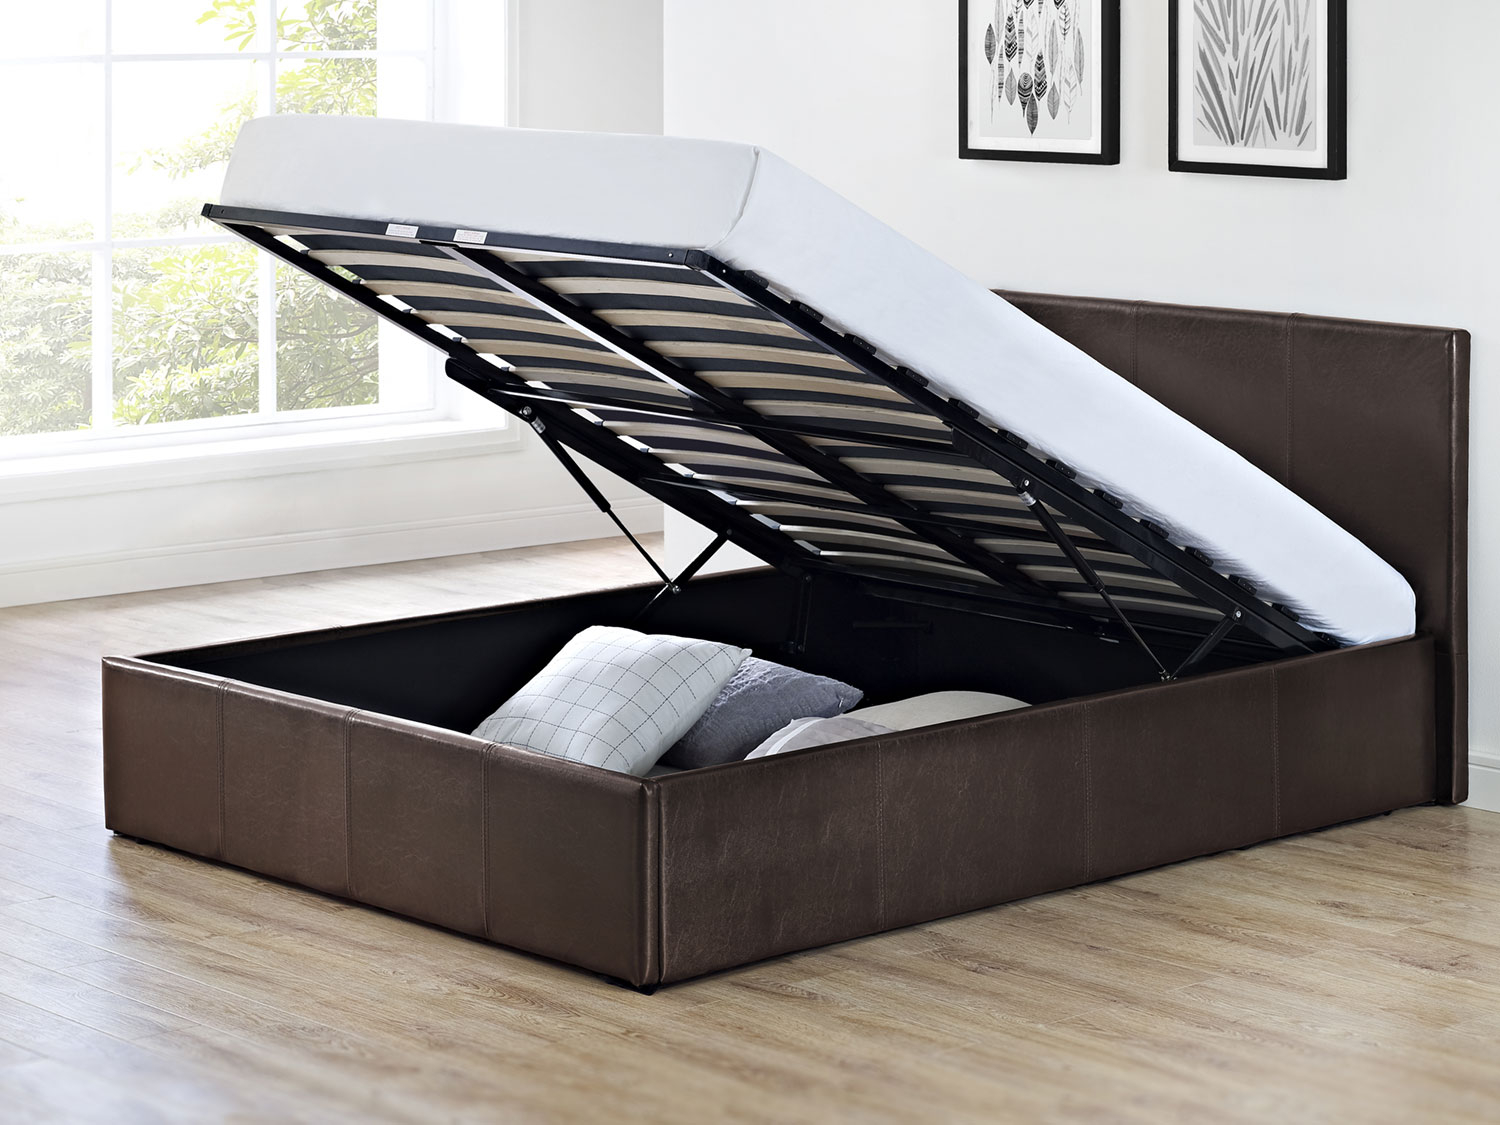 Lift Up Storage Bed You Ll Love In 2021, Lift Up Storage Bed Frame Queen